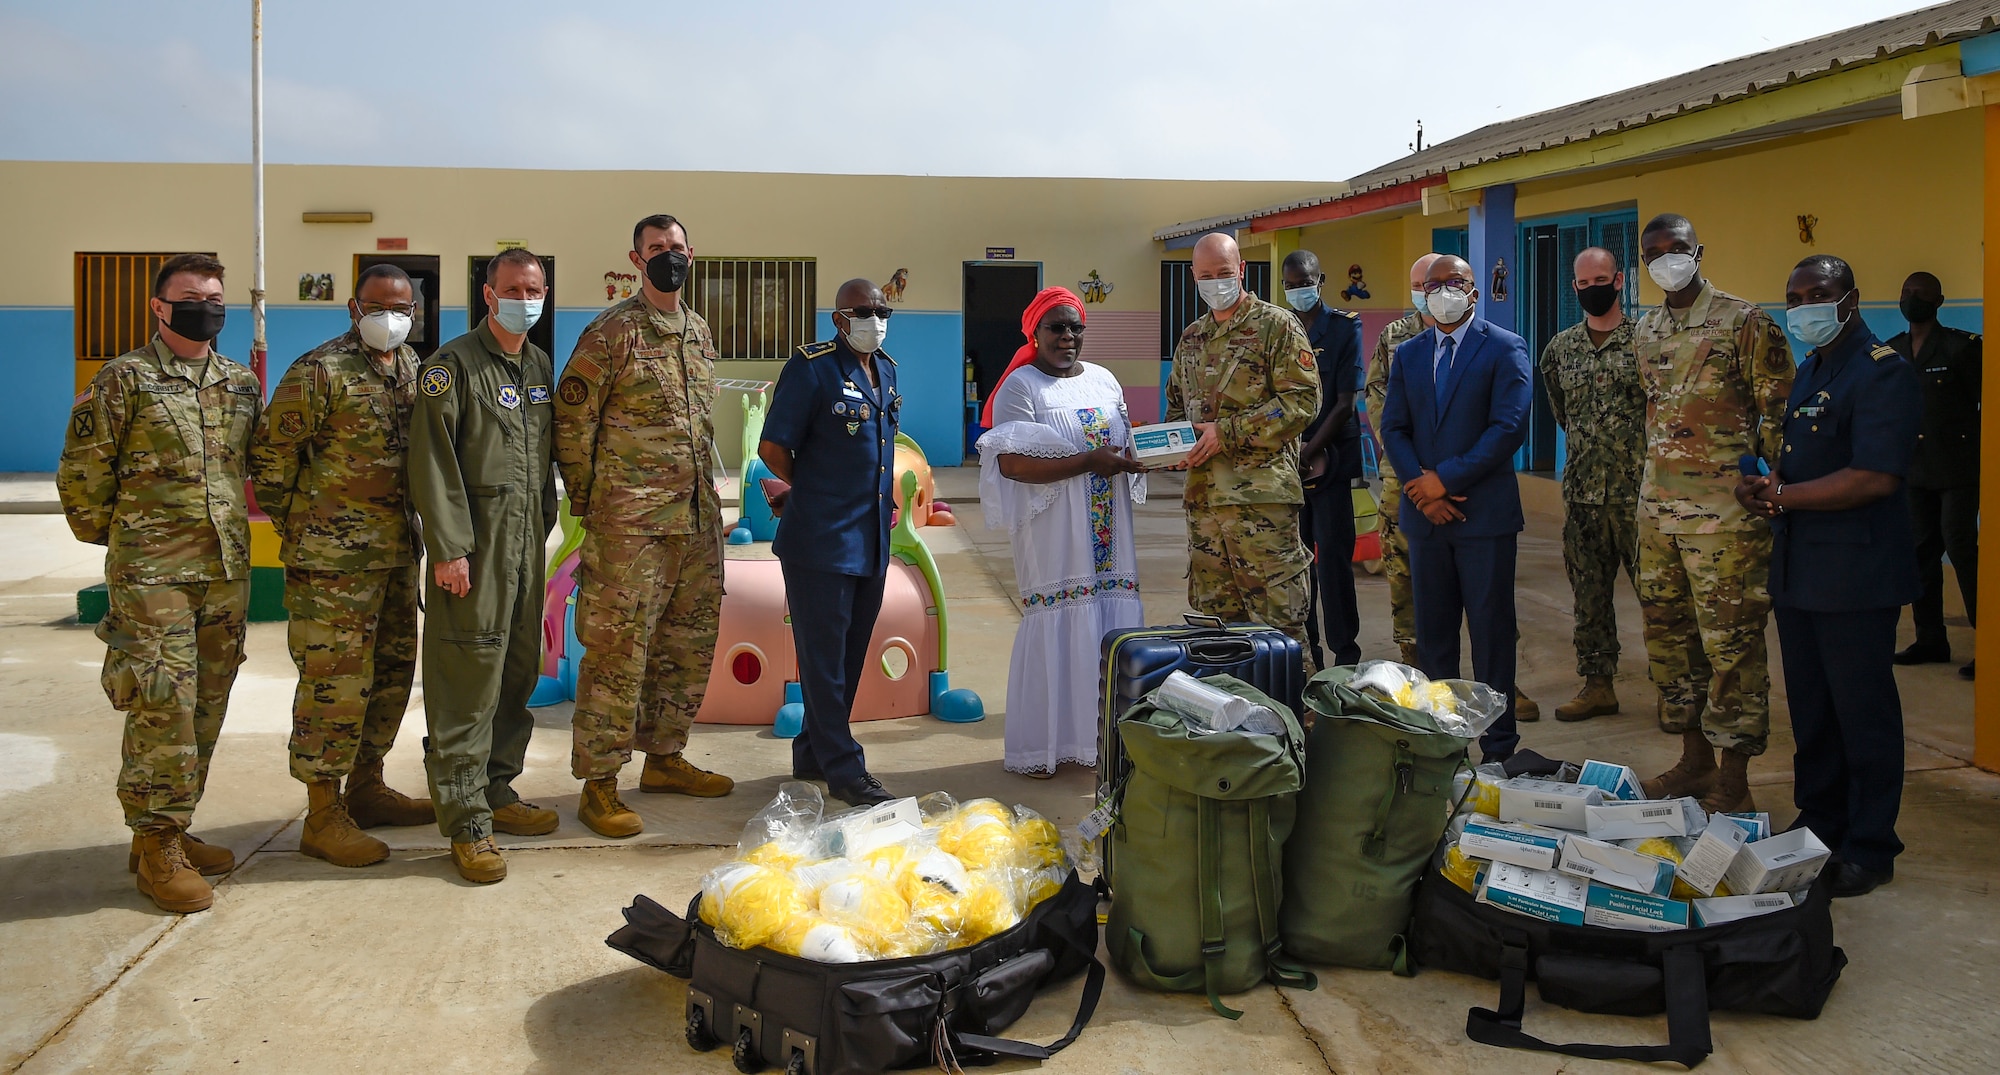 U.S. and Senegalese Airmen pose with over 2,500 masks donated by the force development team to the child development center in Dakar, Senegal, May 28, 2021. U.S. Air Forces Europe-Air Forces Africa conducts force development missions across 28 countries in Europe and Africa to empower ally and partner nations through the development of foundational capabilities and enduring relationships. (U.S. Air Force photo by 1st Lt. Hannah Durbin)